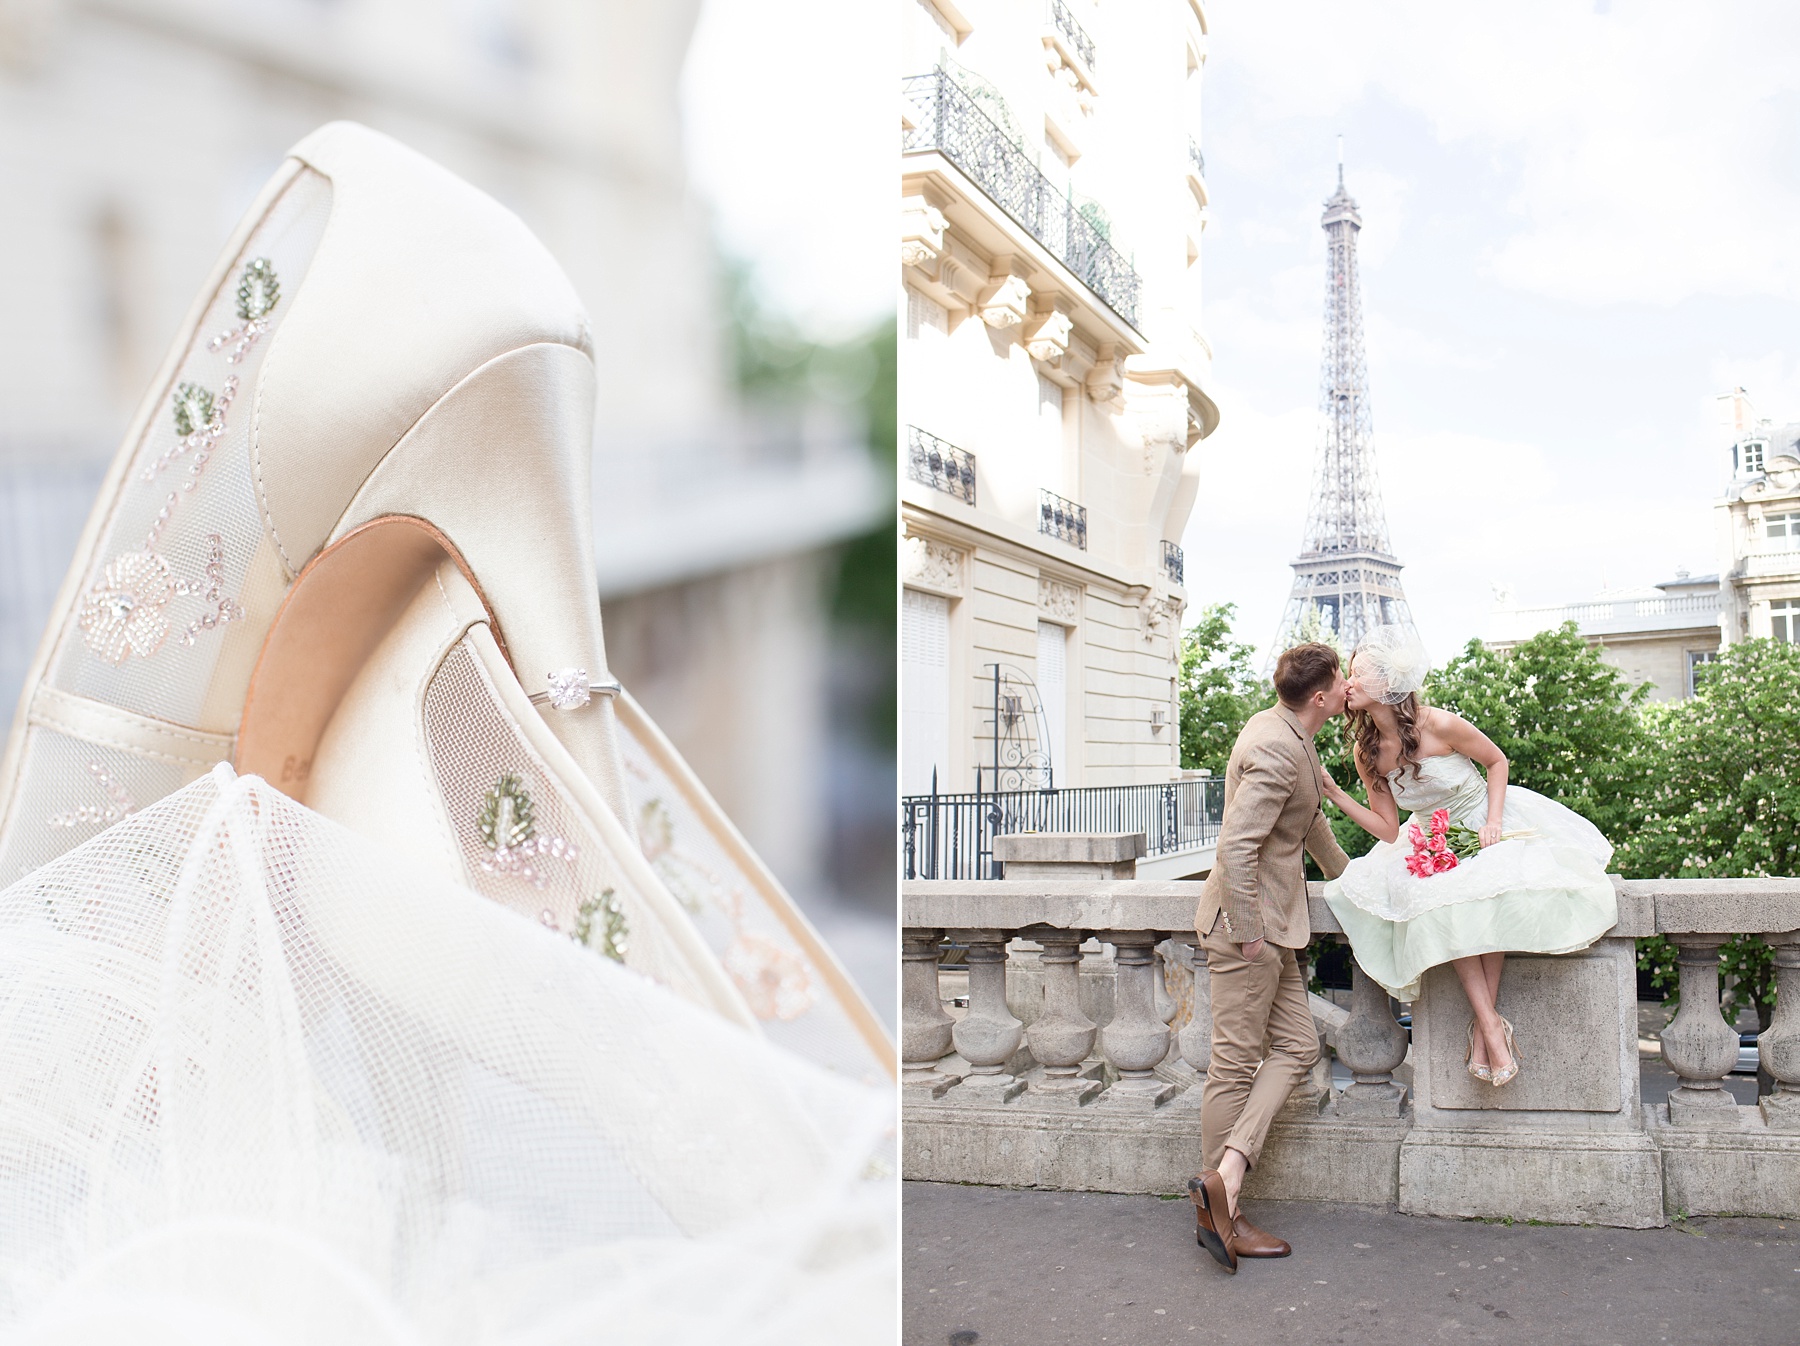 French engagement session with spring details photographed by destination wedding photographer Randi Michelle